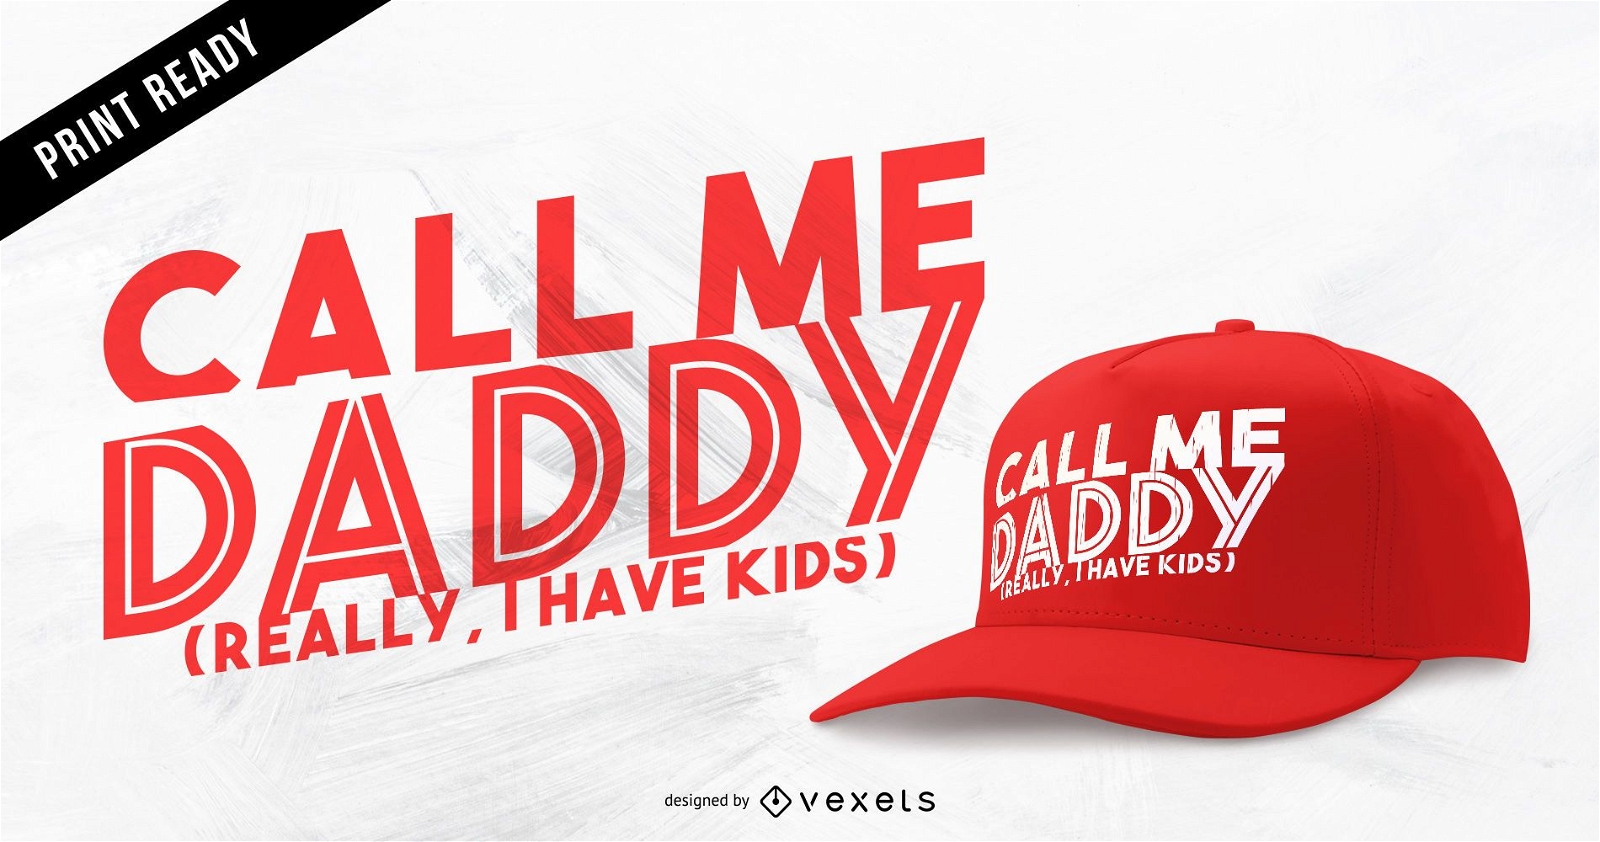 Call me daddy t-shirt or hat design